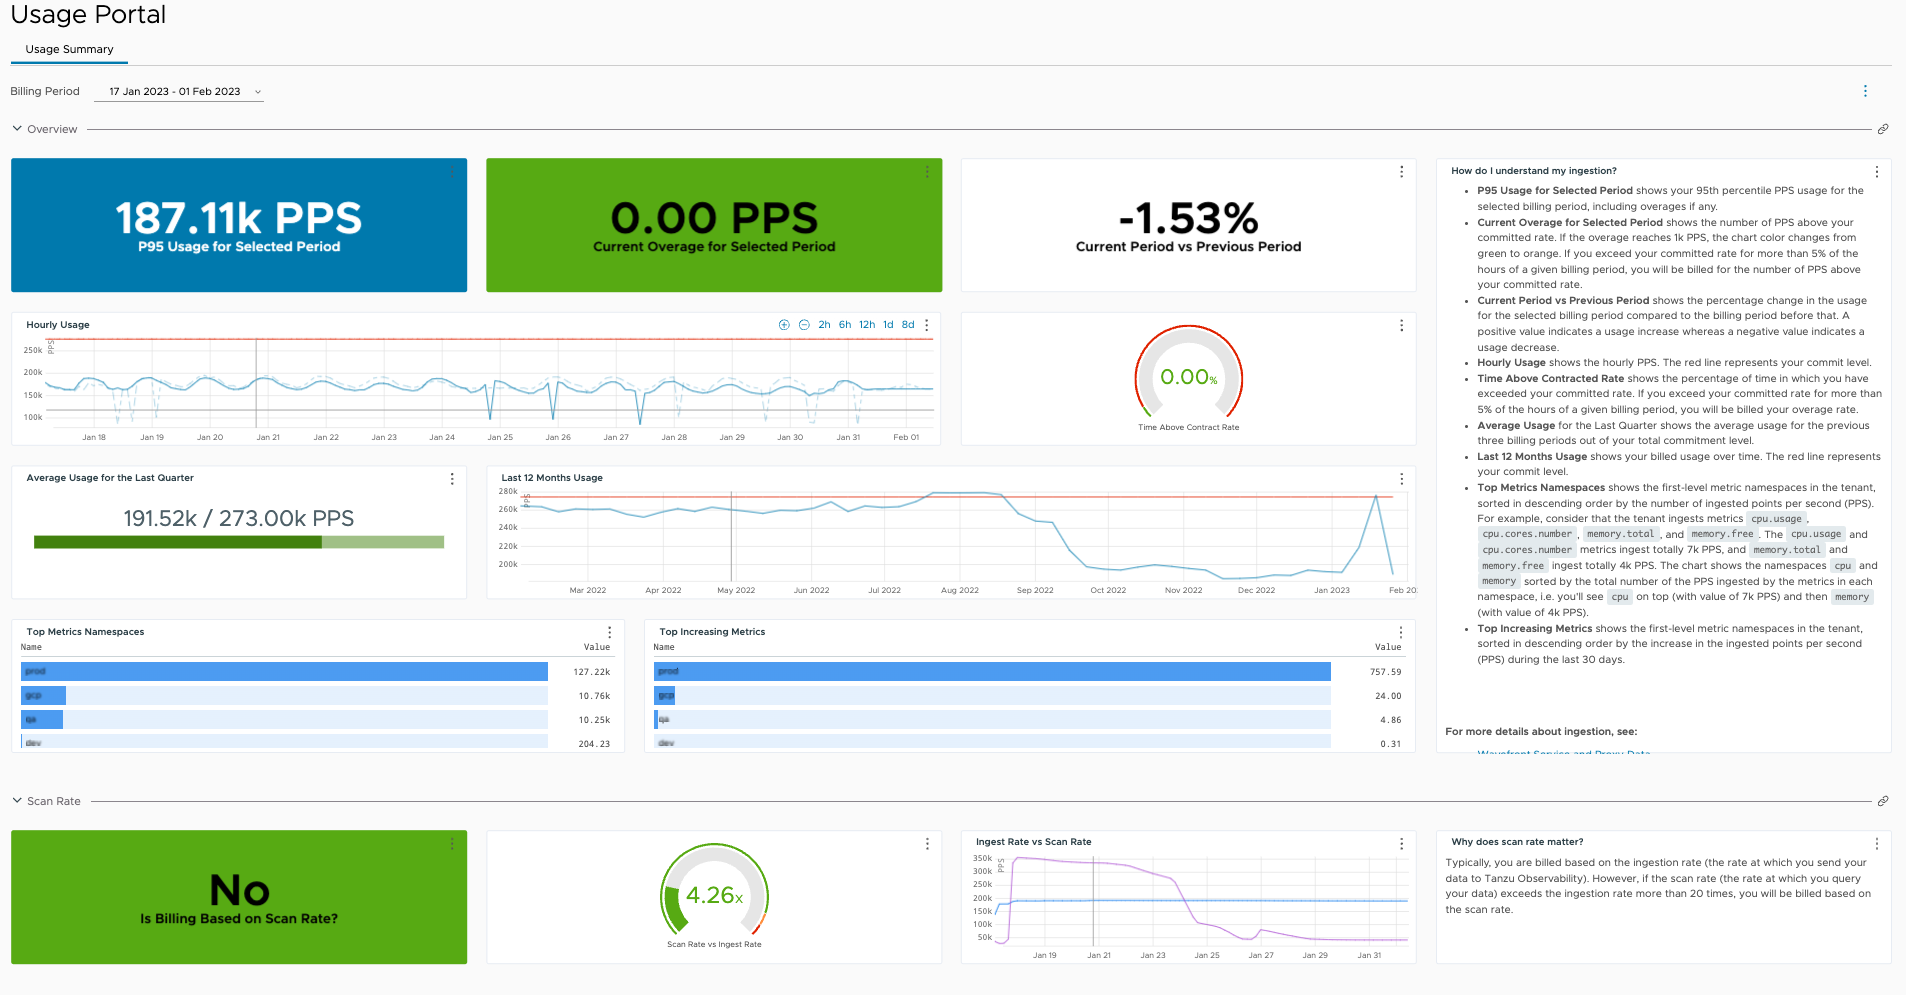 Example of the Usage Summary dashboard